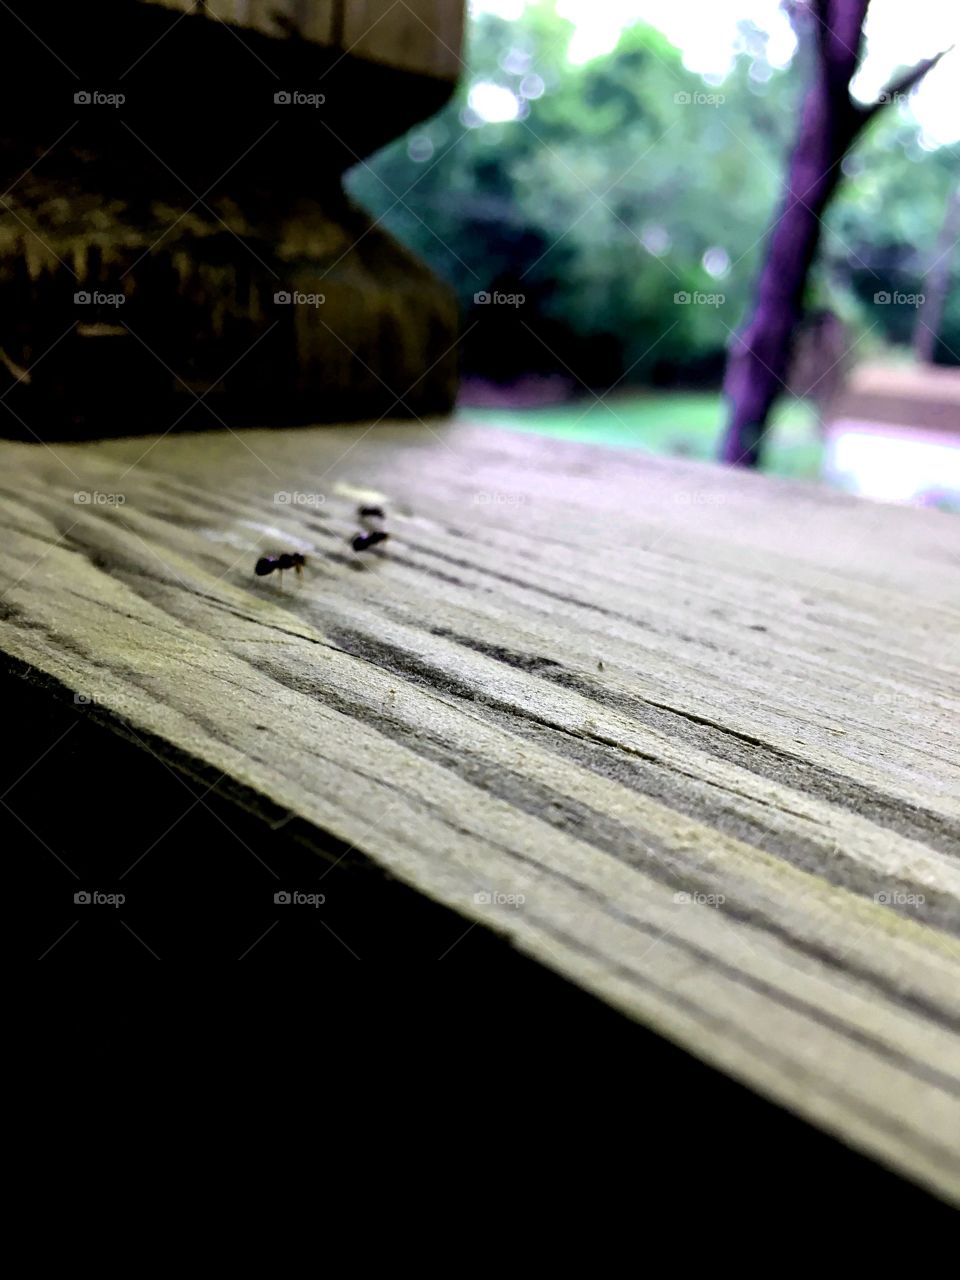 Ants chasing lunch on the deck